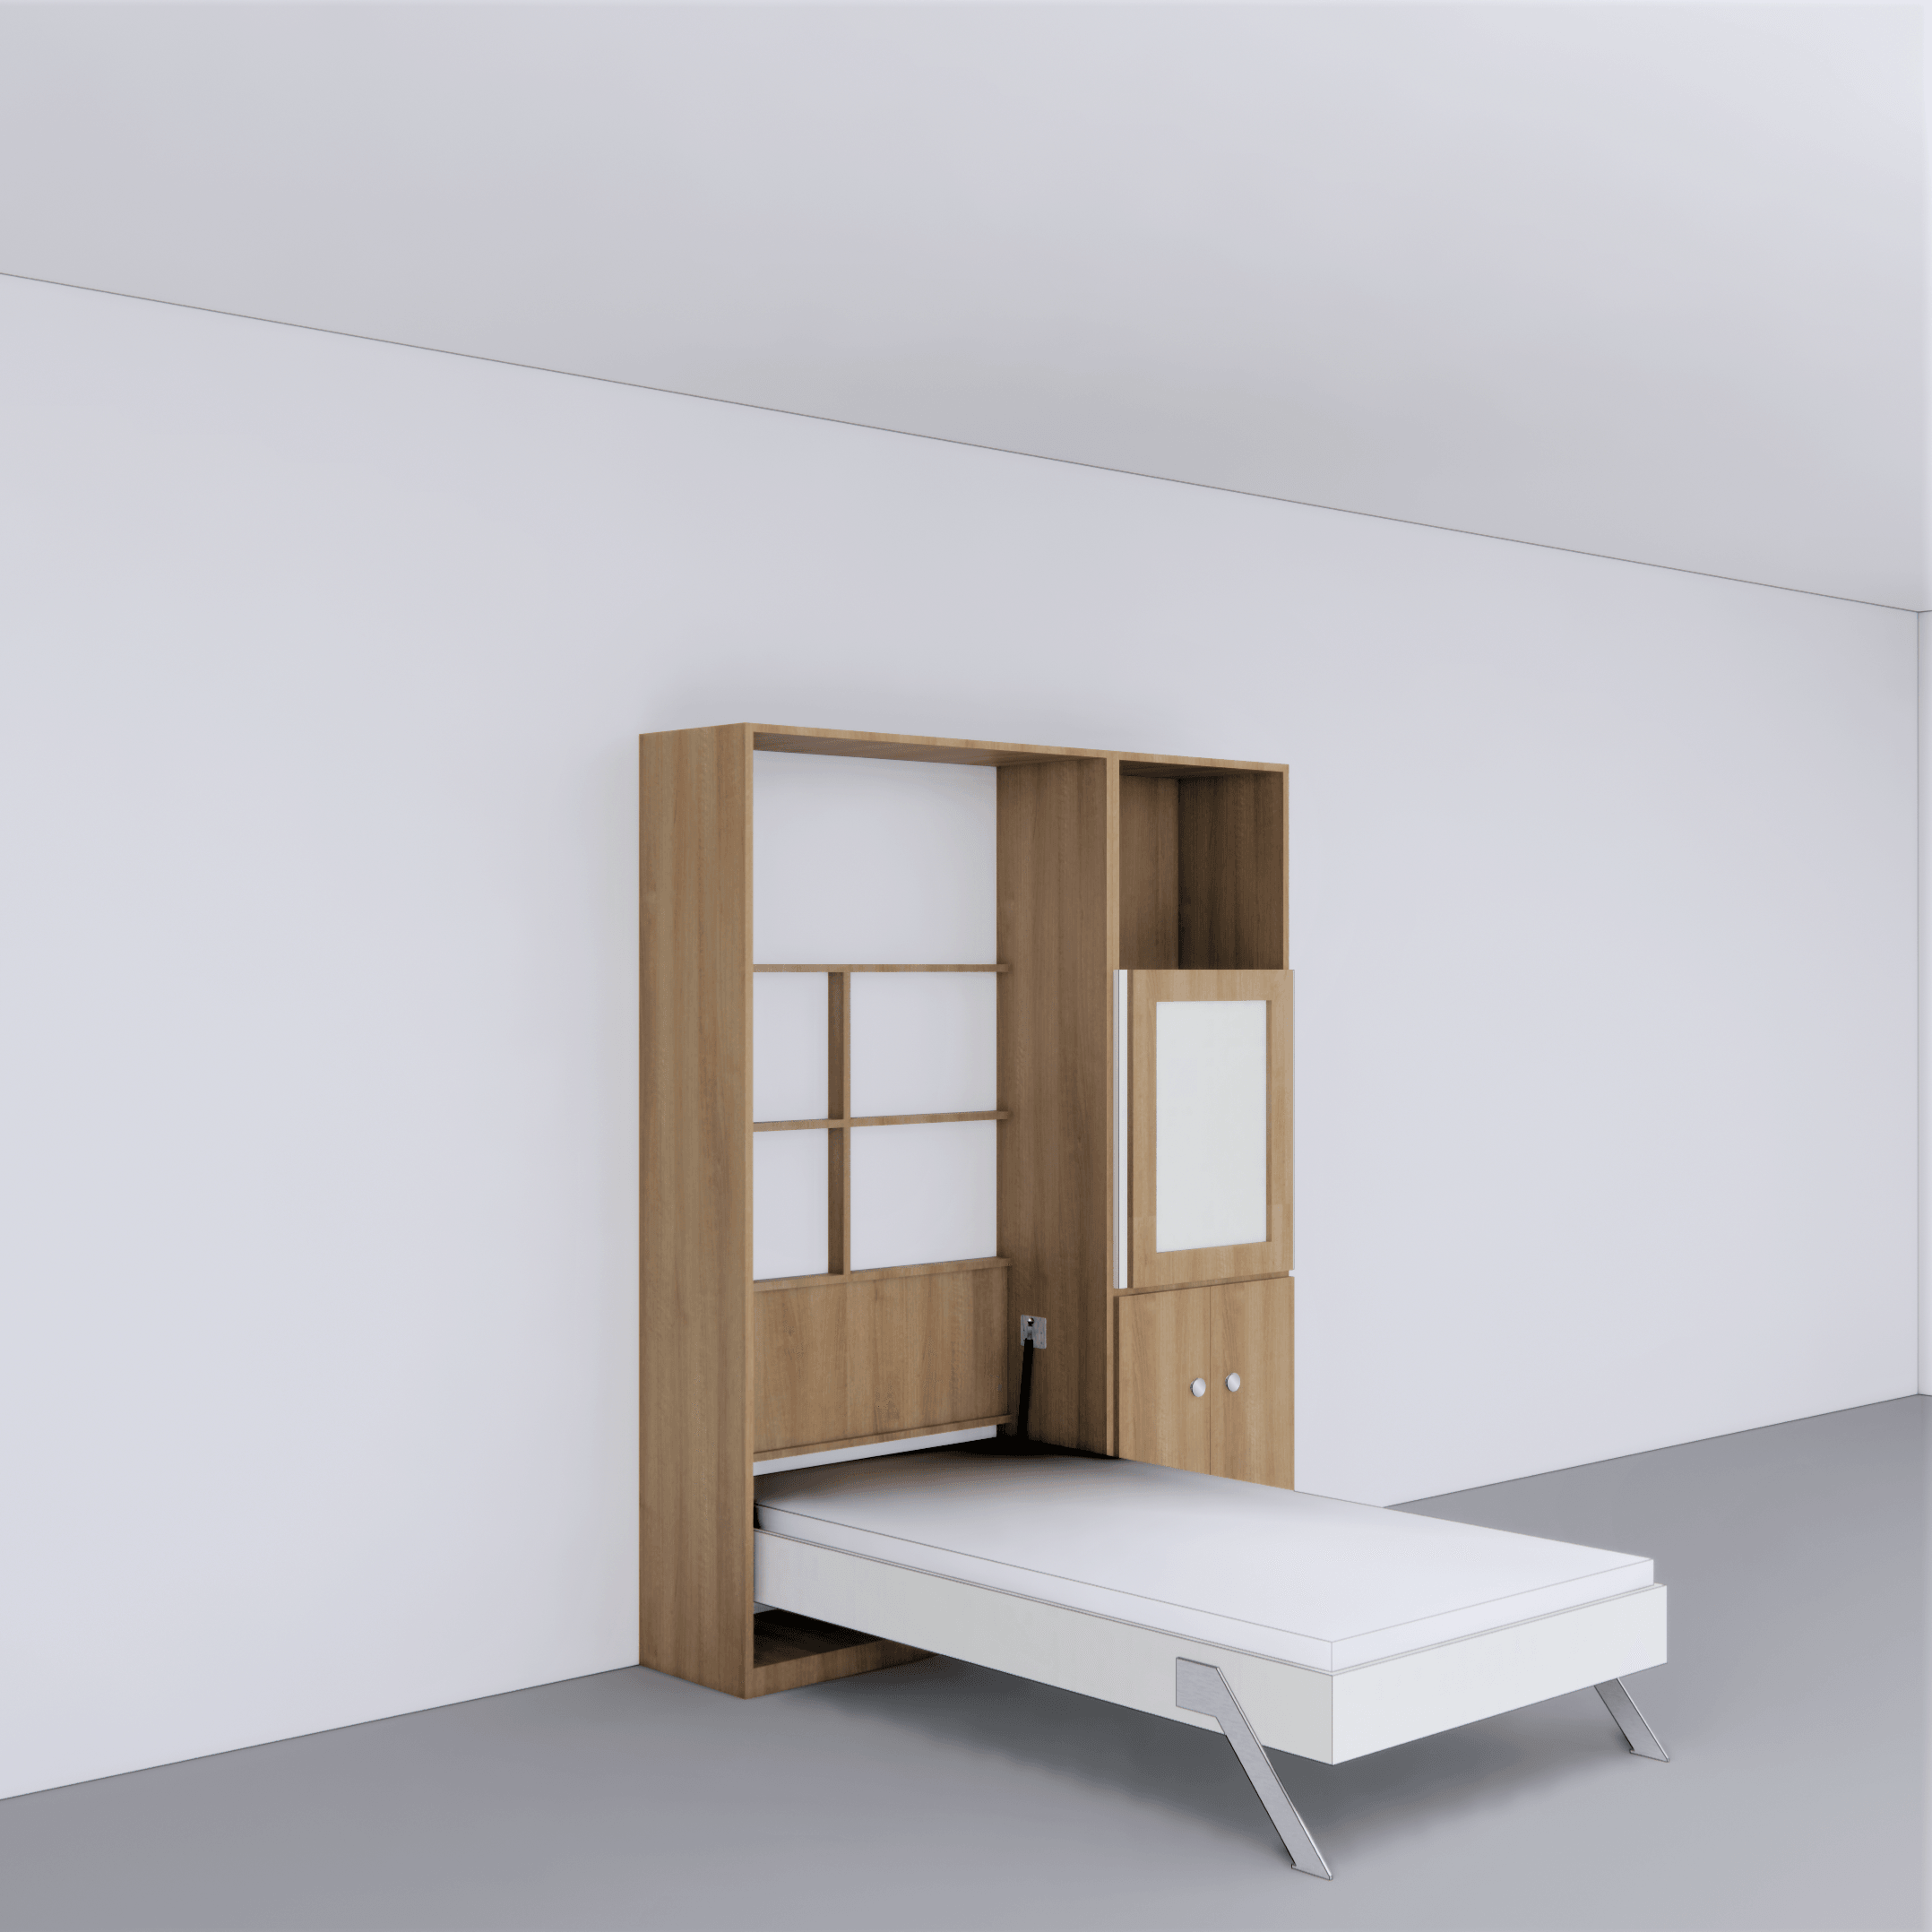 Single Vertical Bed with iTable Medium - InvisibleBed.com